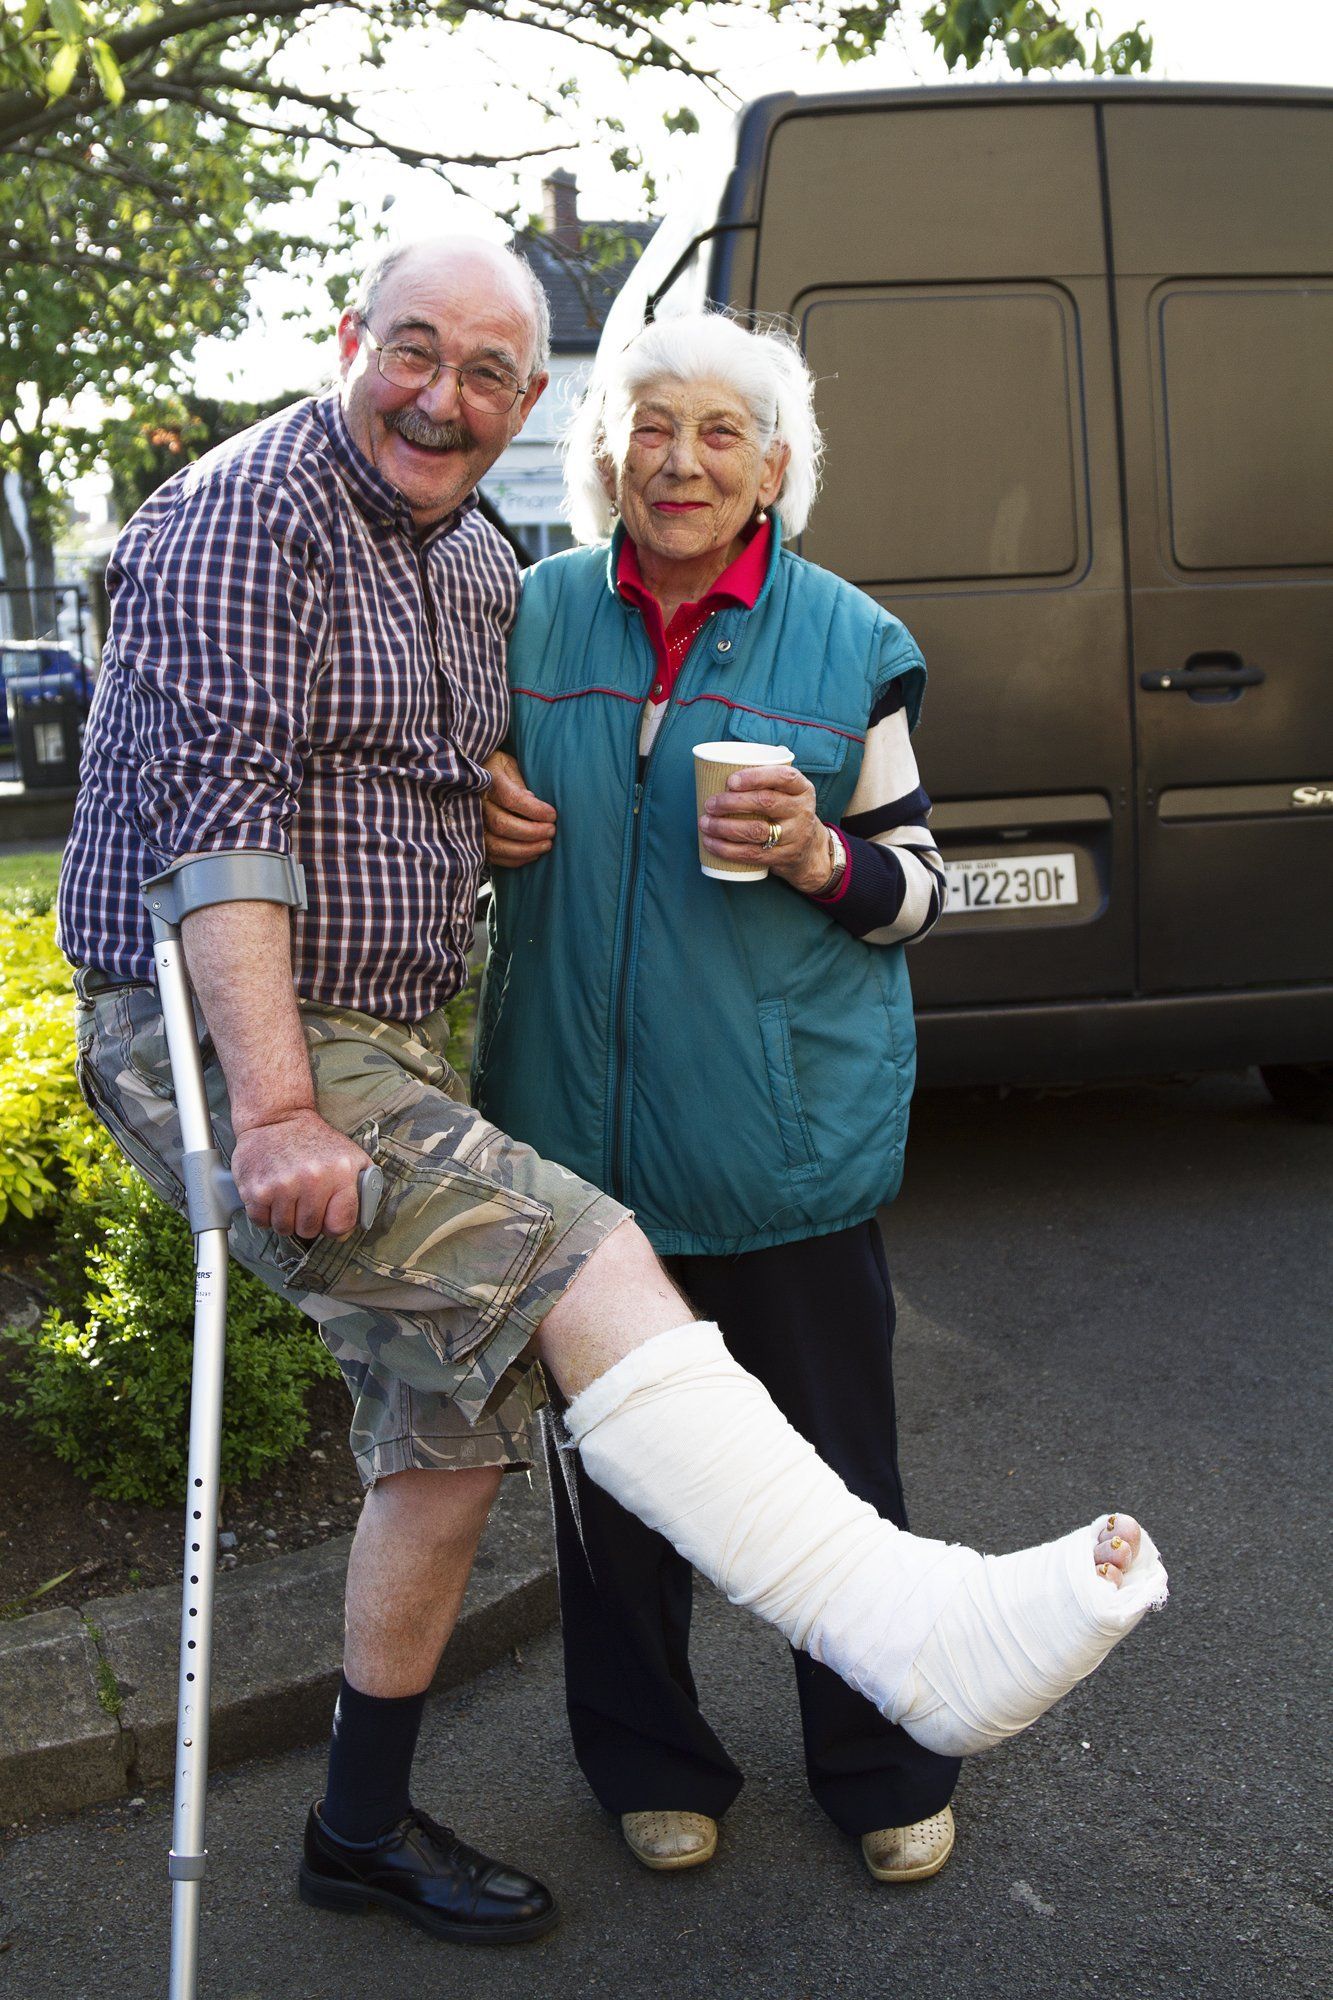 A man with crutches is standing next to a woman with a cast on her leg